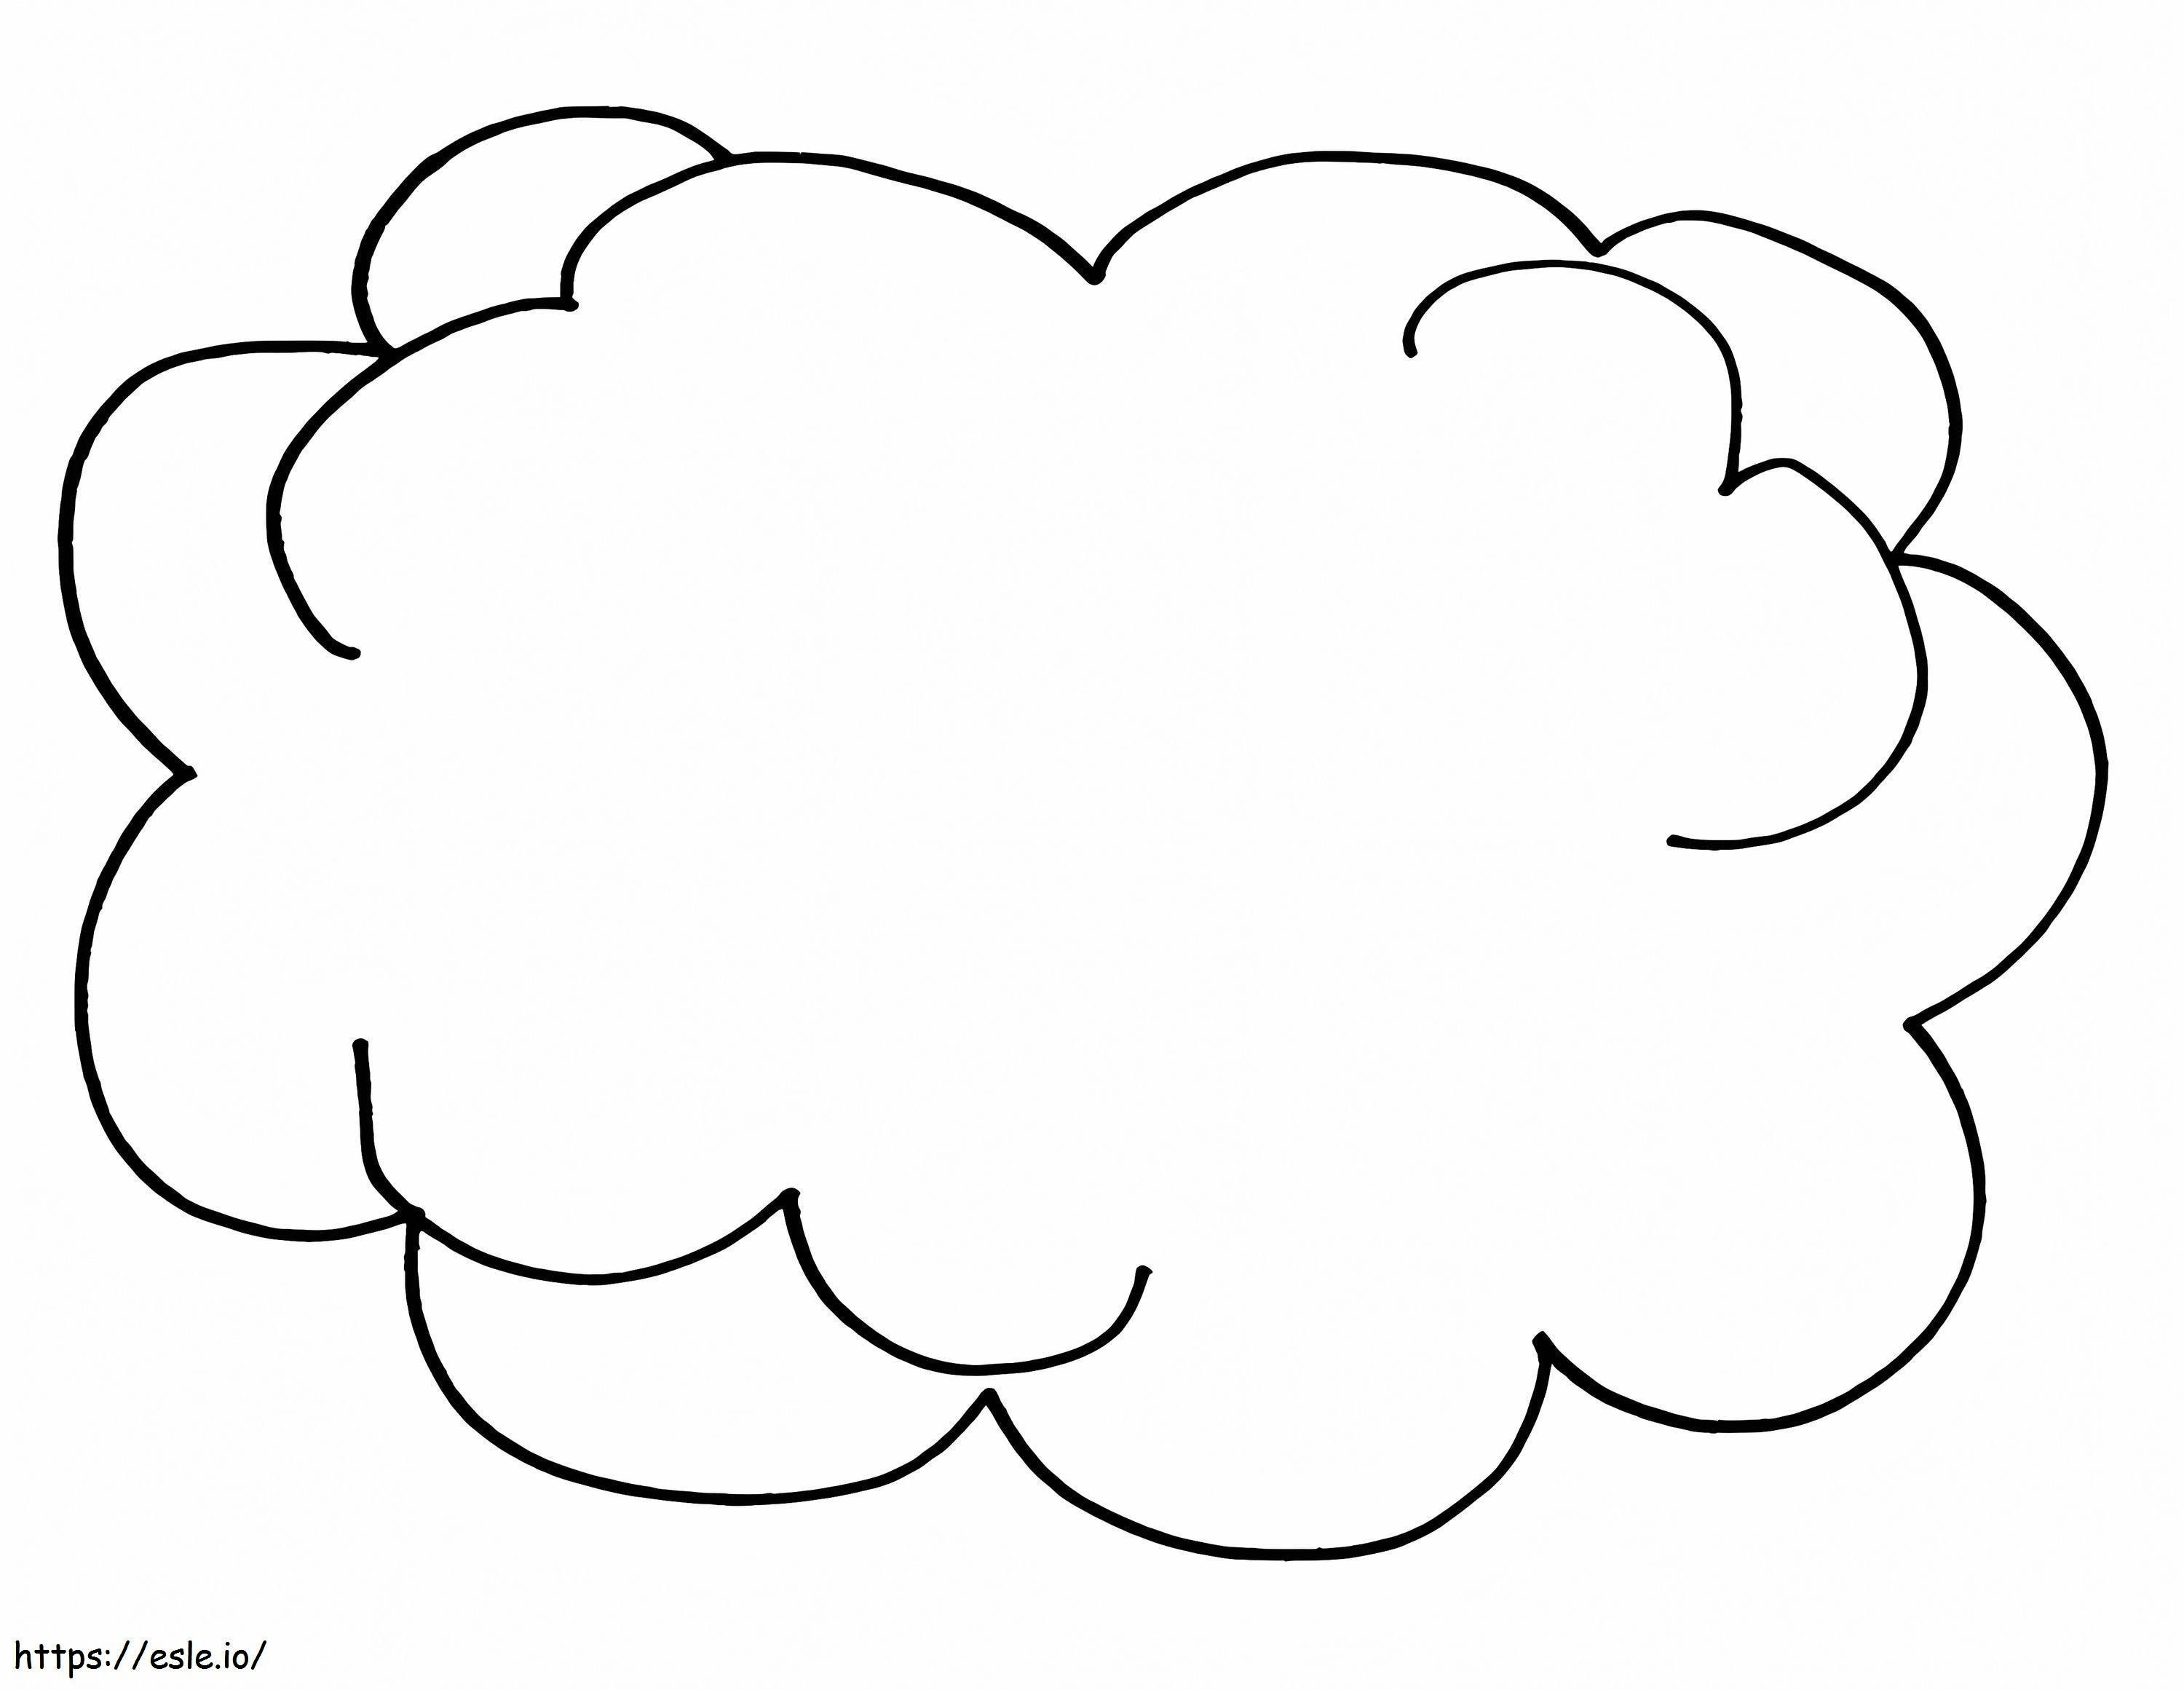 Easy Cloud coloring page